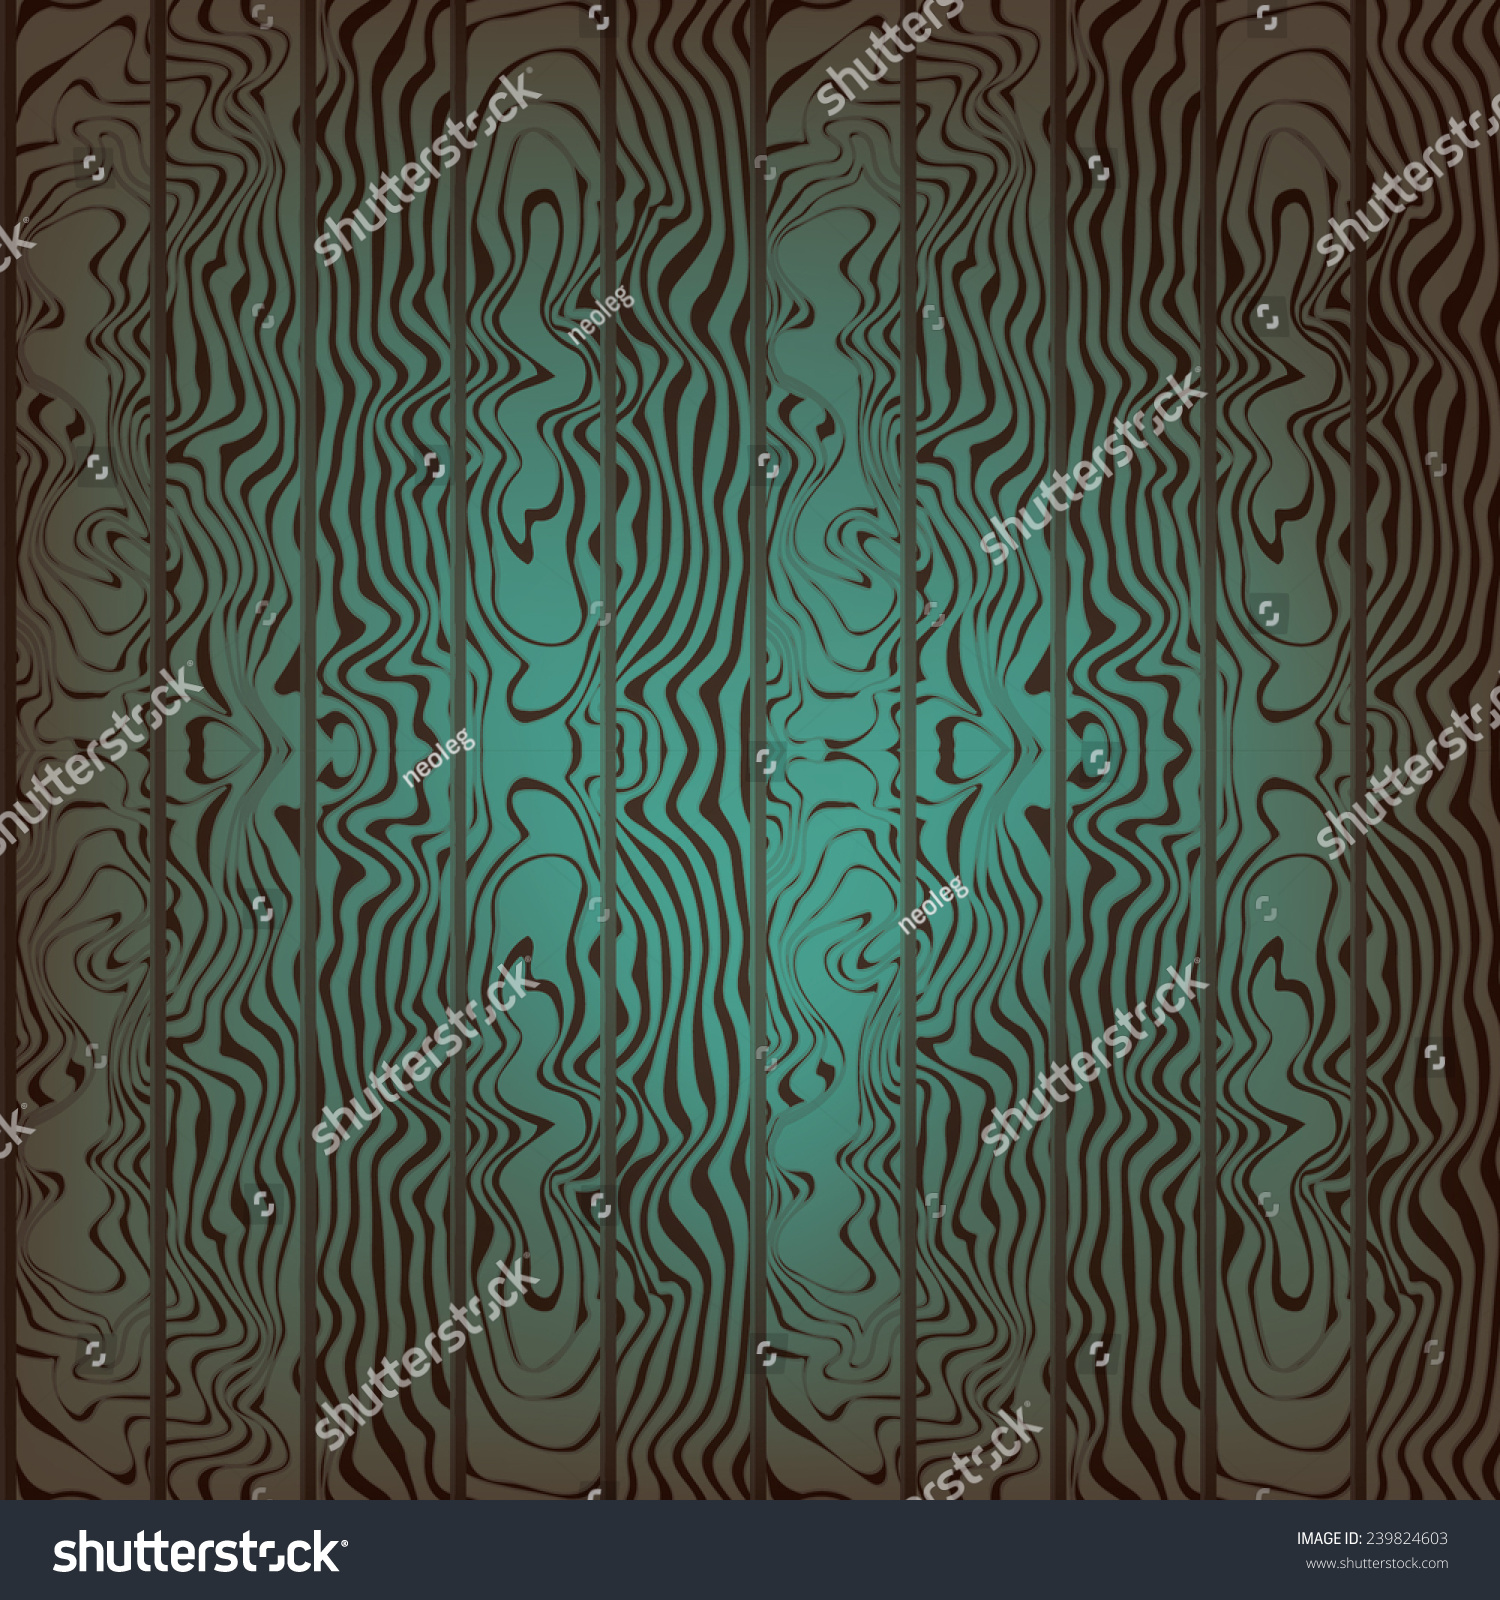 Seamless Wood Texture Stock Vector Royalty Free 239824603 Shutterstock 